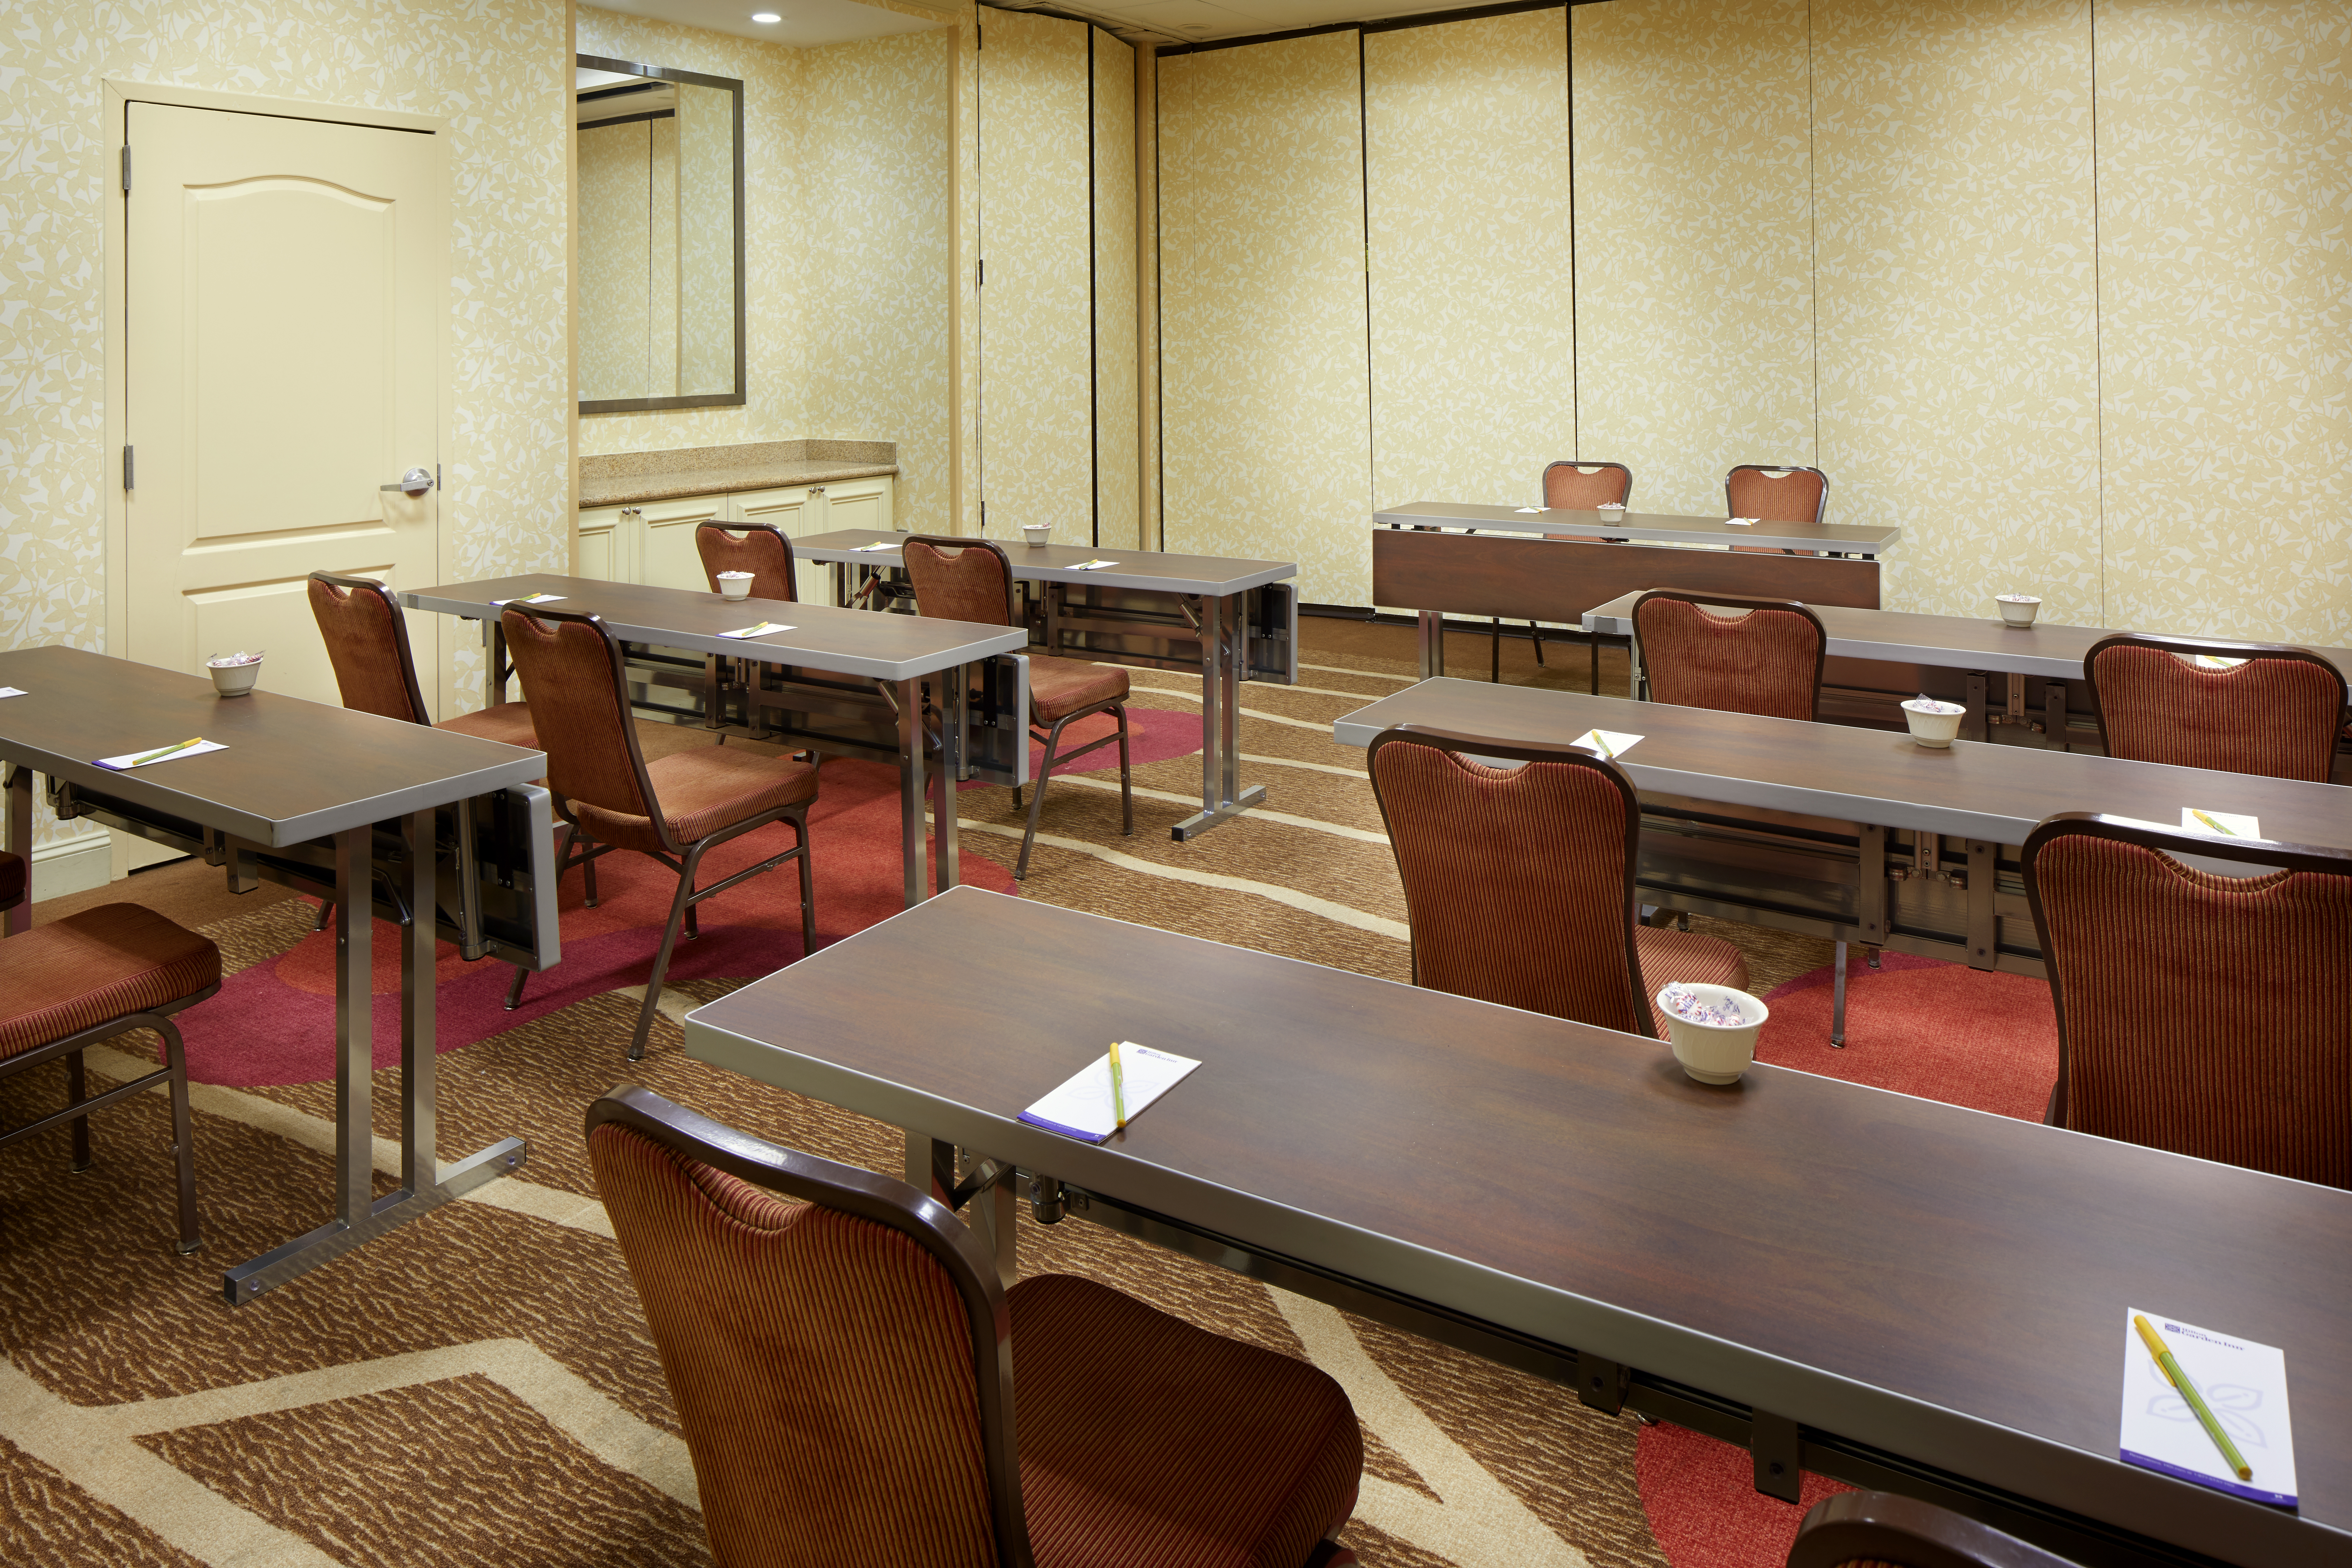 Classroom Setup in Meeting Room With Tables and Chairs Facing Speaker's Table and Two Chairs